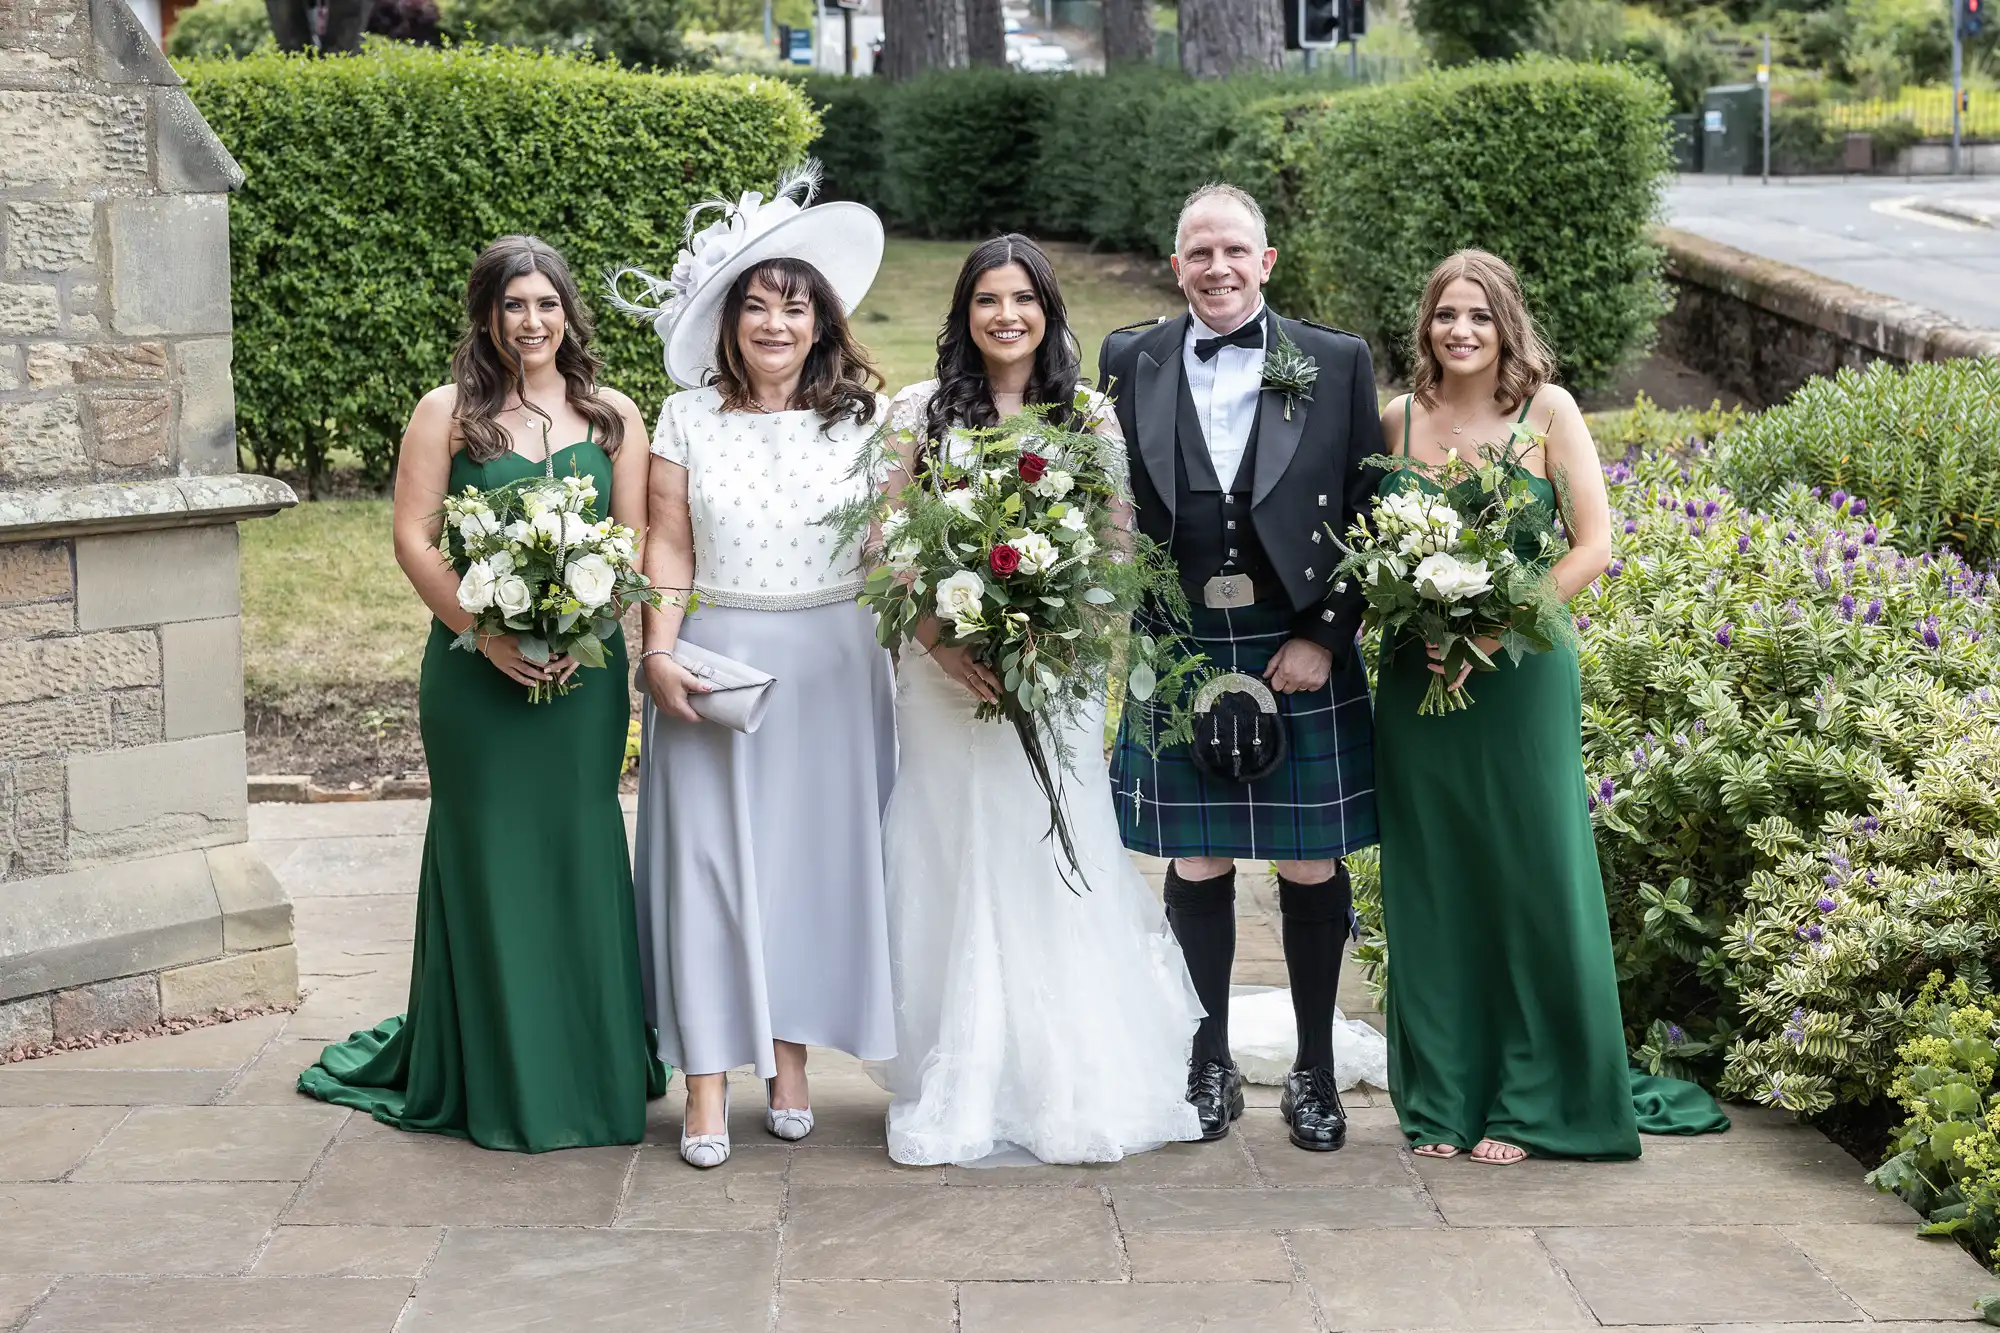 A bride and groom with three women in green dresses holding bouquets, standing by a garden. The groom wears a kilt and the bride is in a white gown.